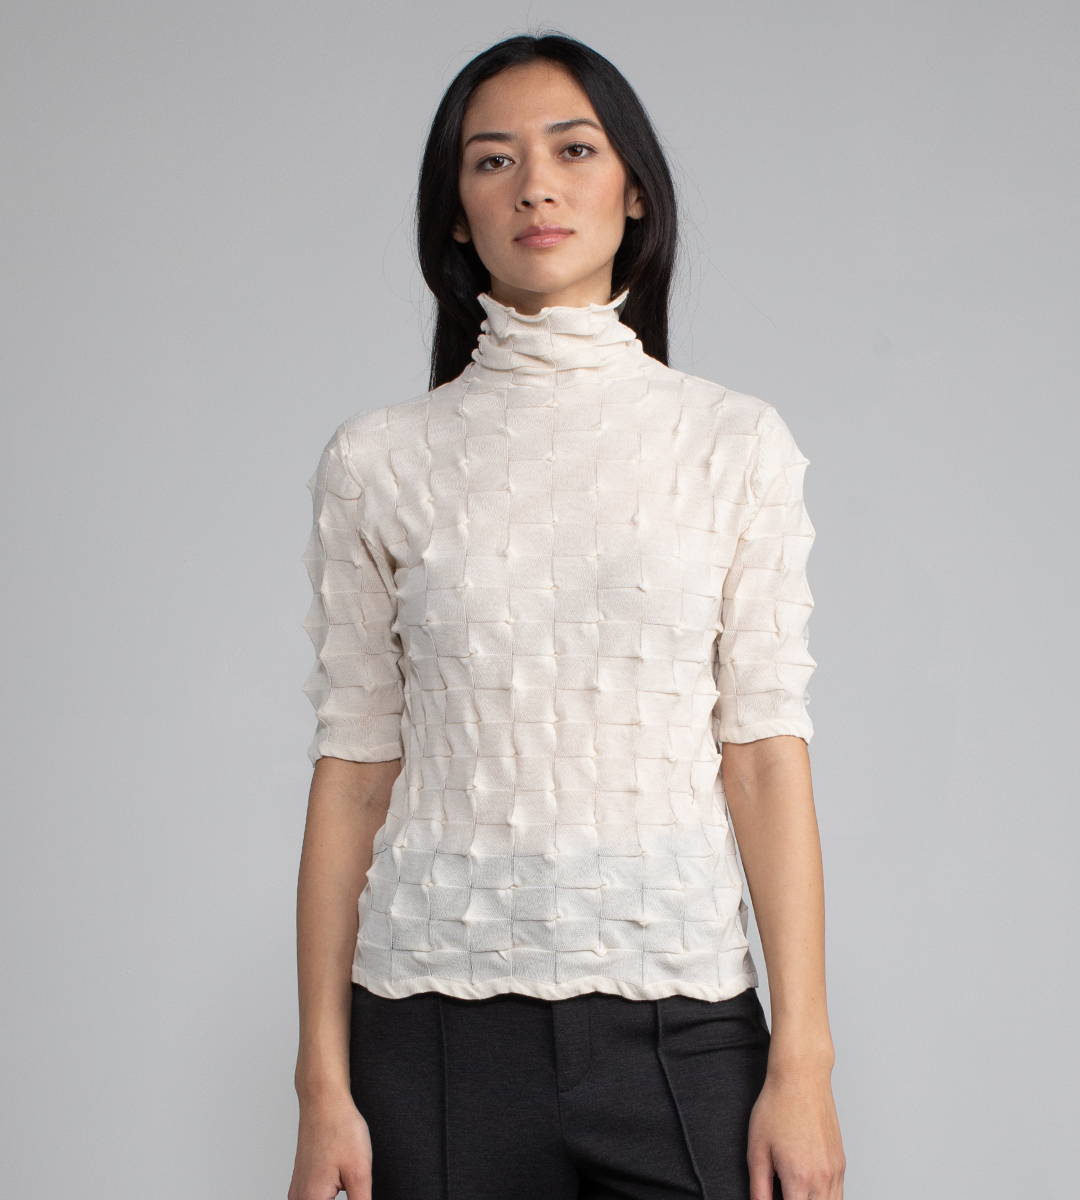 Woman wearing a white t-neck origami knit top.